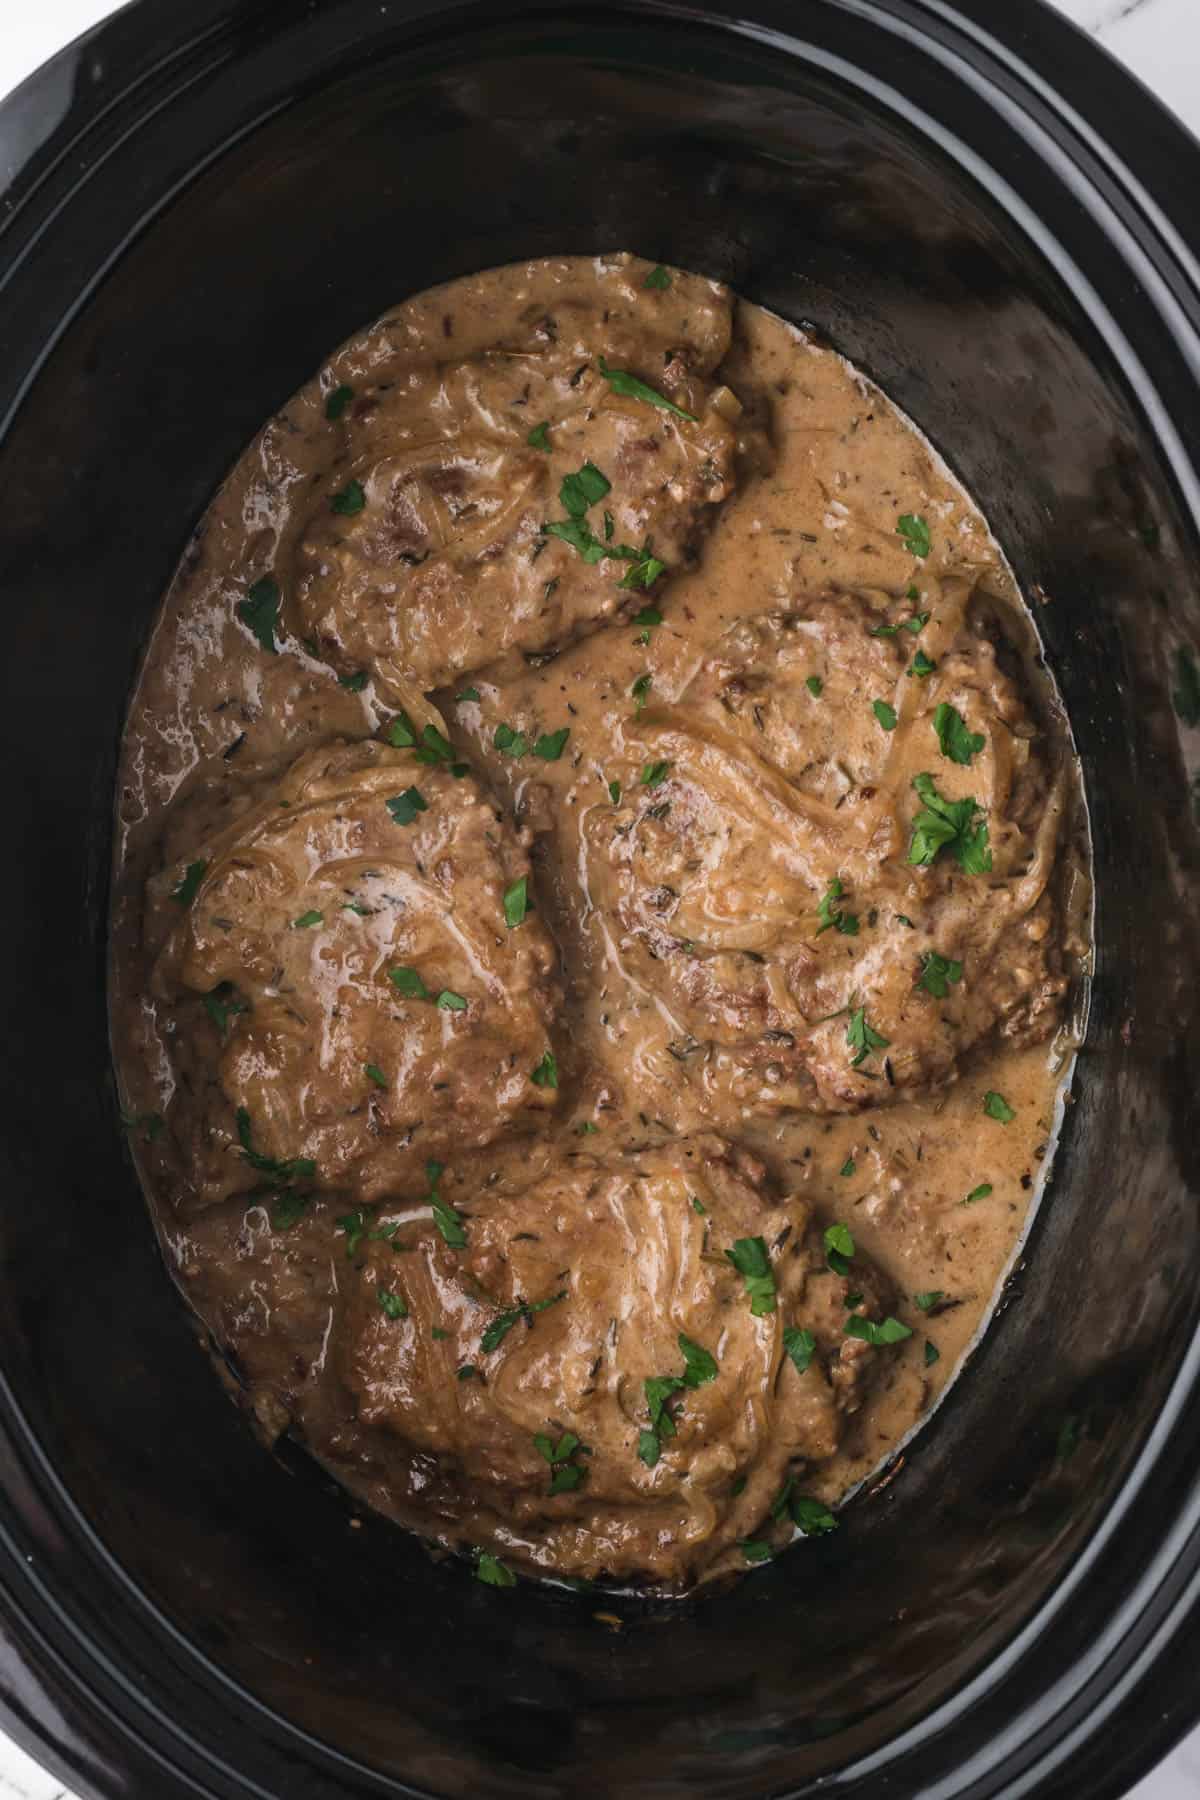 Four slow cooker cube steaks in a crock pot with sauce.